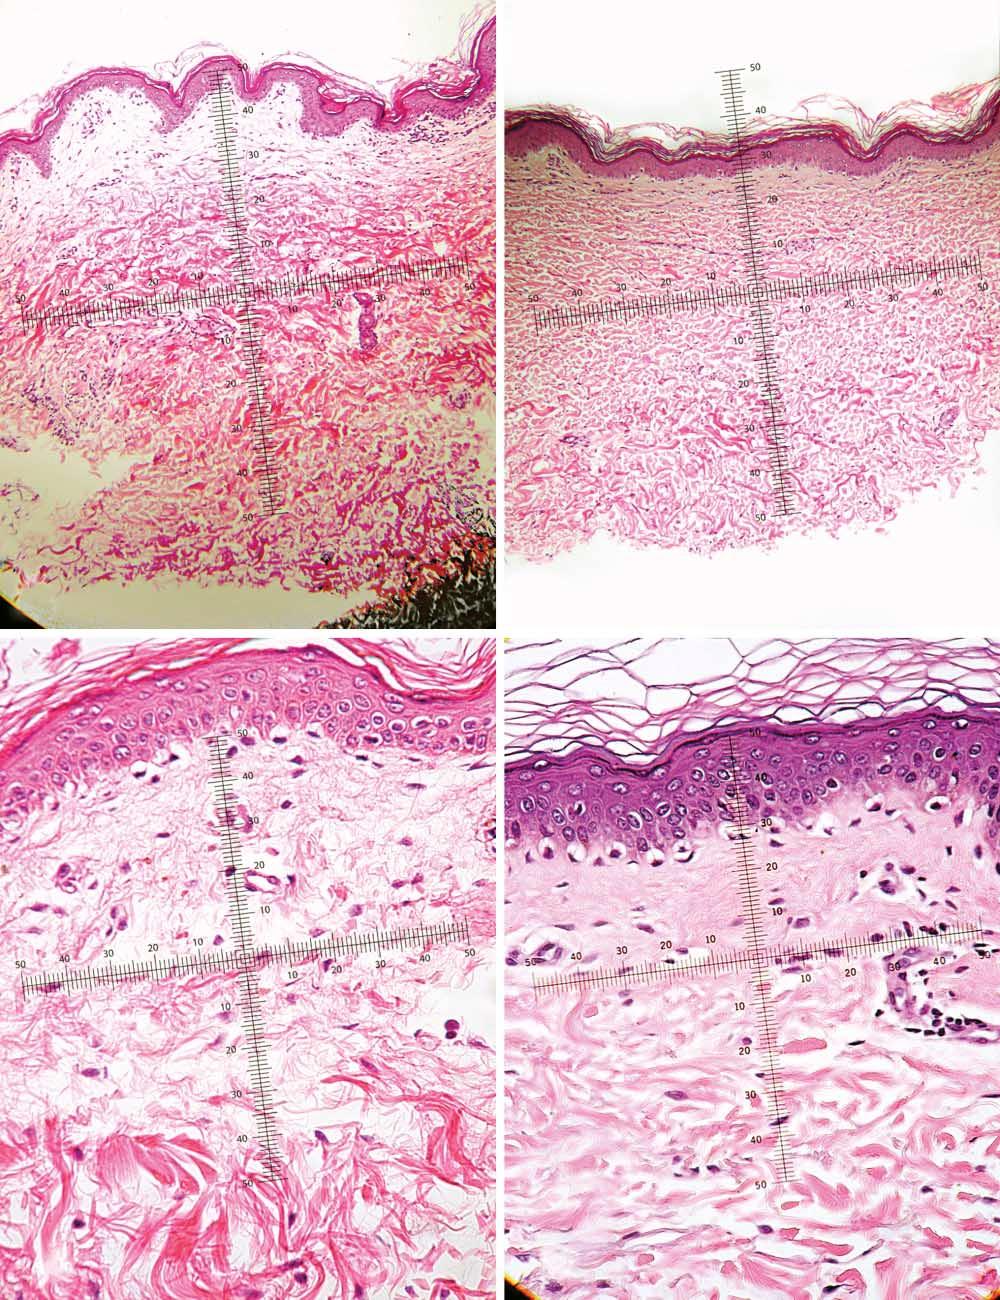 A C D Figure 7. iopsy specimens of inner arm skin of a 51-year-old woman before (A) and 6 months after () 6 treatments with combined potassium titanyl phosphate (KTP) and Nd:YAG lasers.